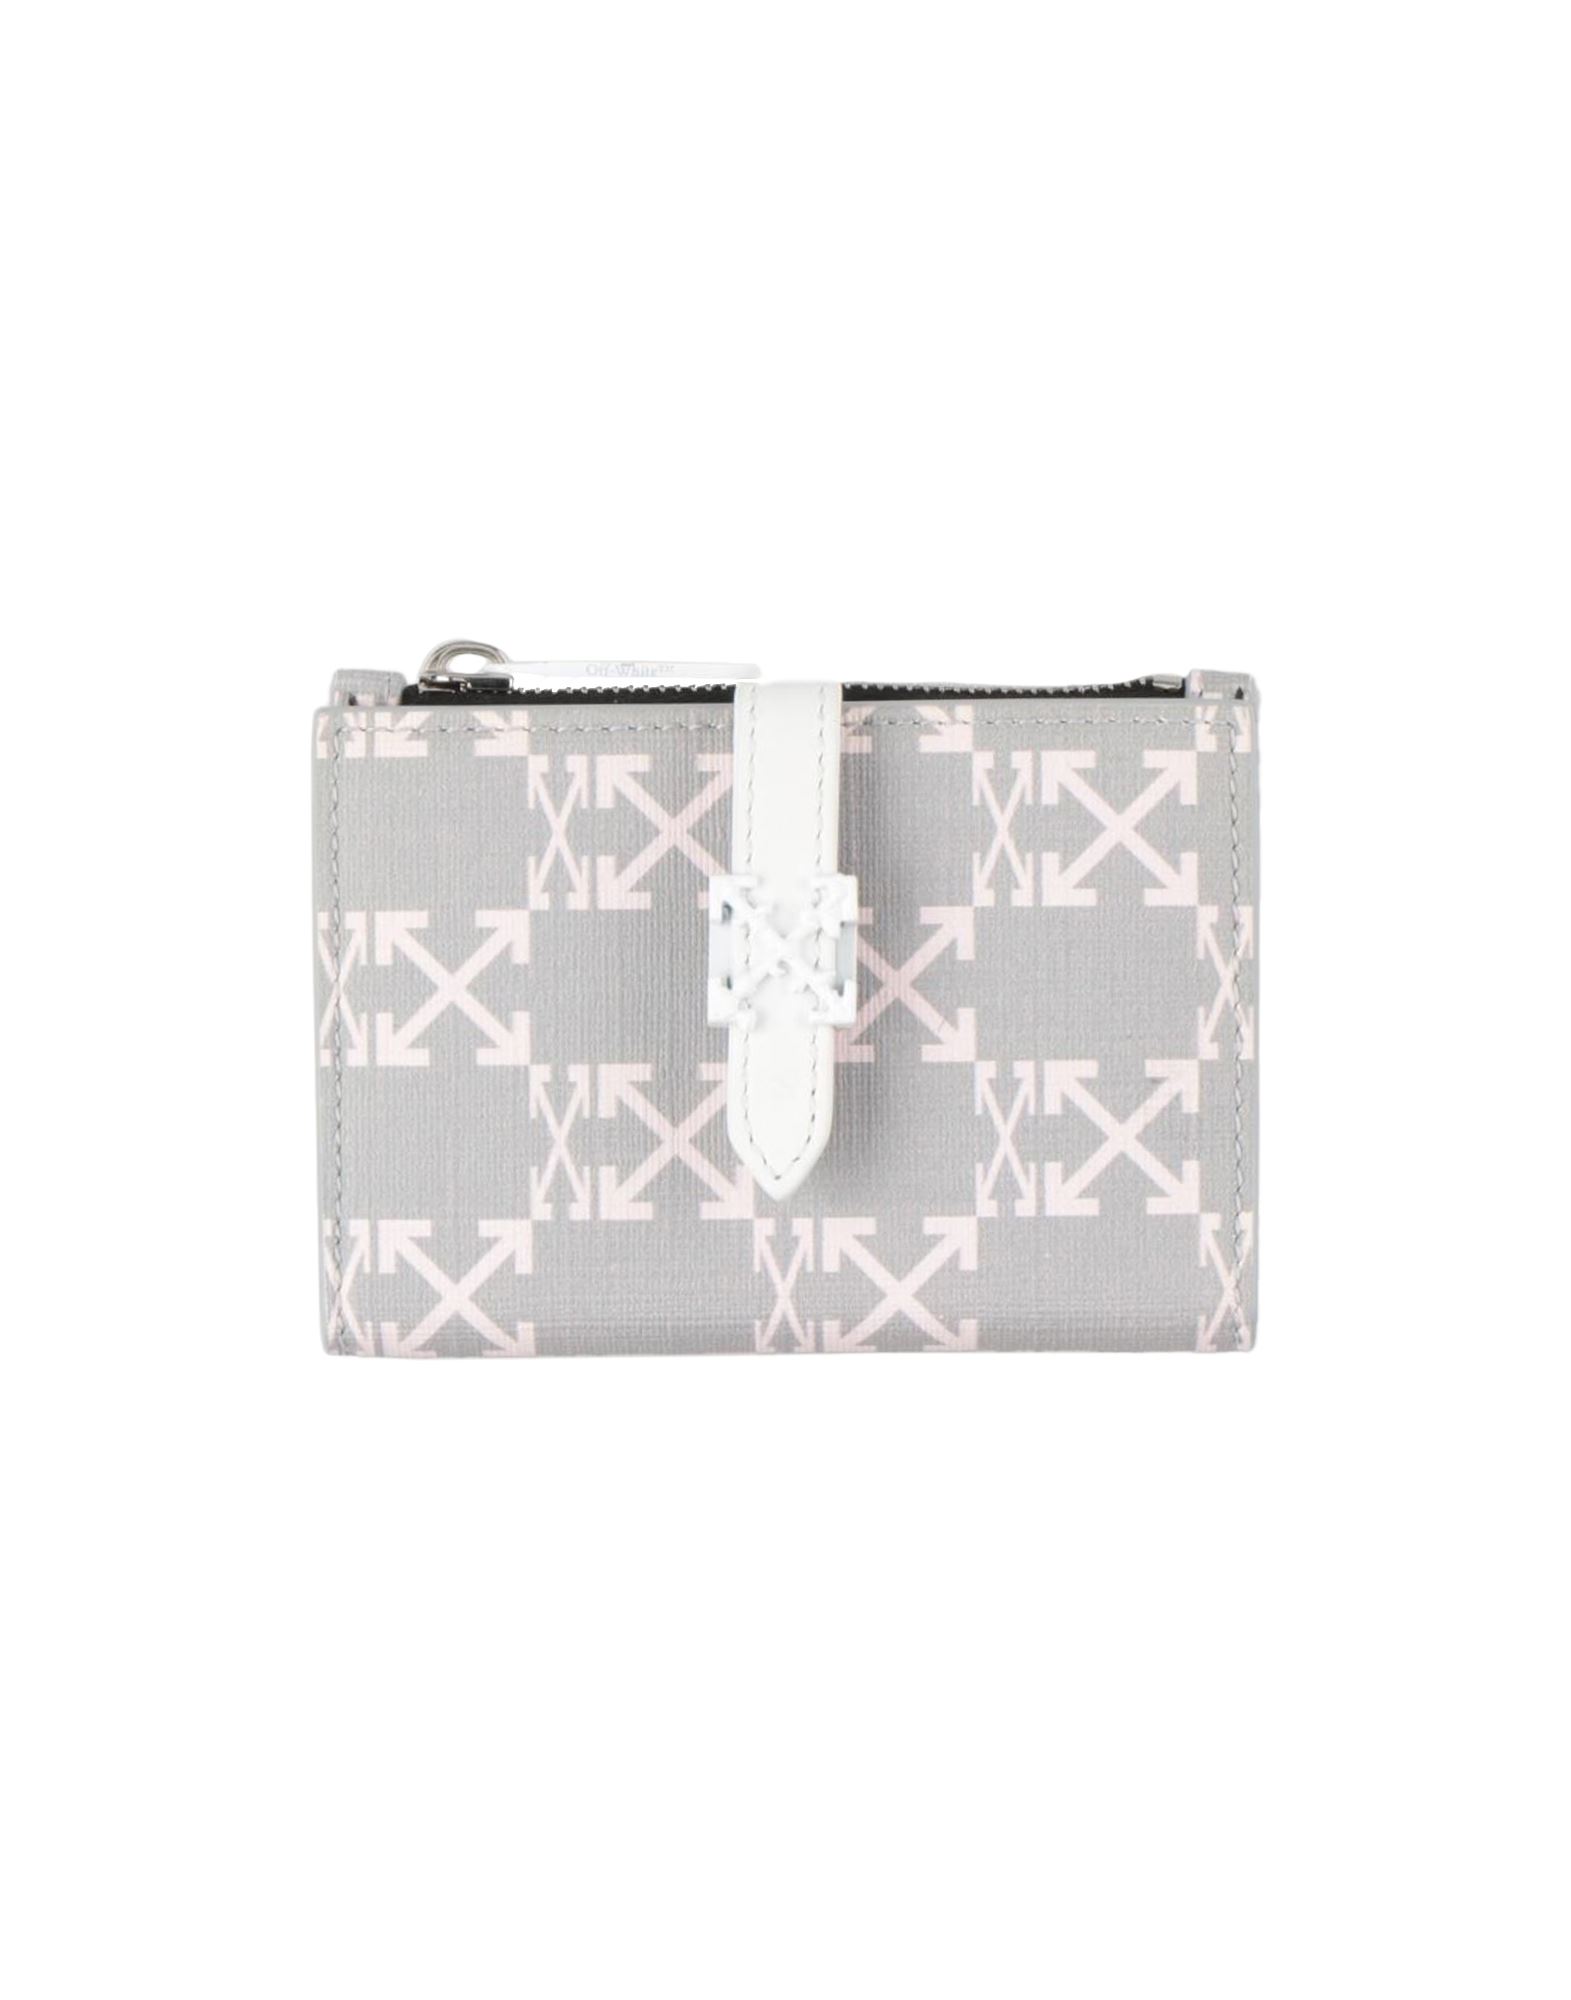 OFF-WHITE OFF-WHITE WOMAN DOCUMENT HOLDER LIGHT GREY SIZE - SOFT LEATHER